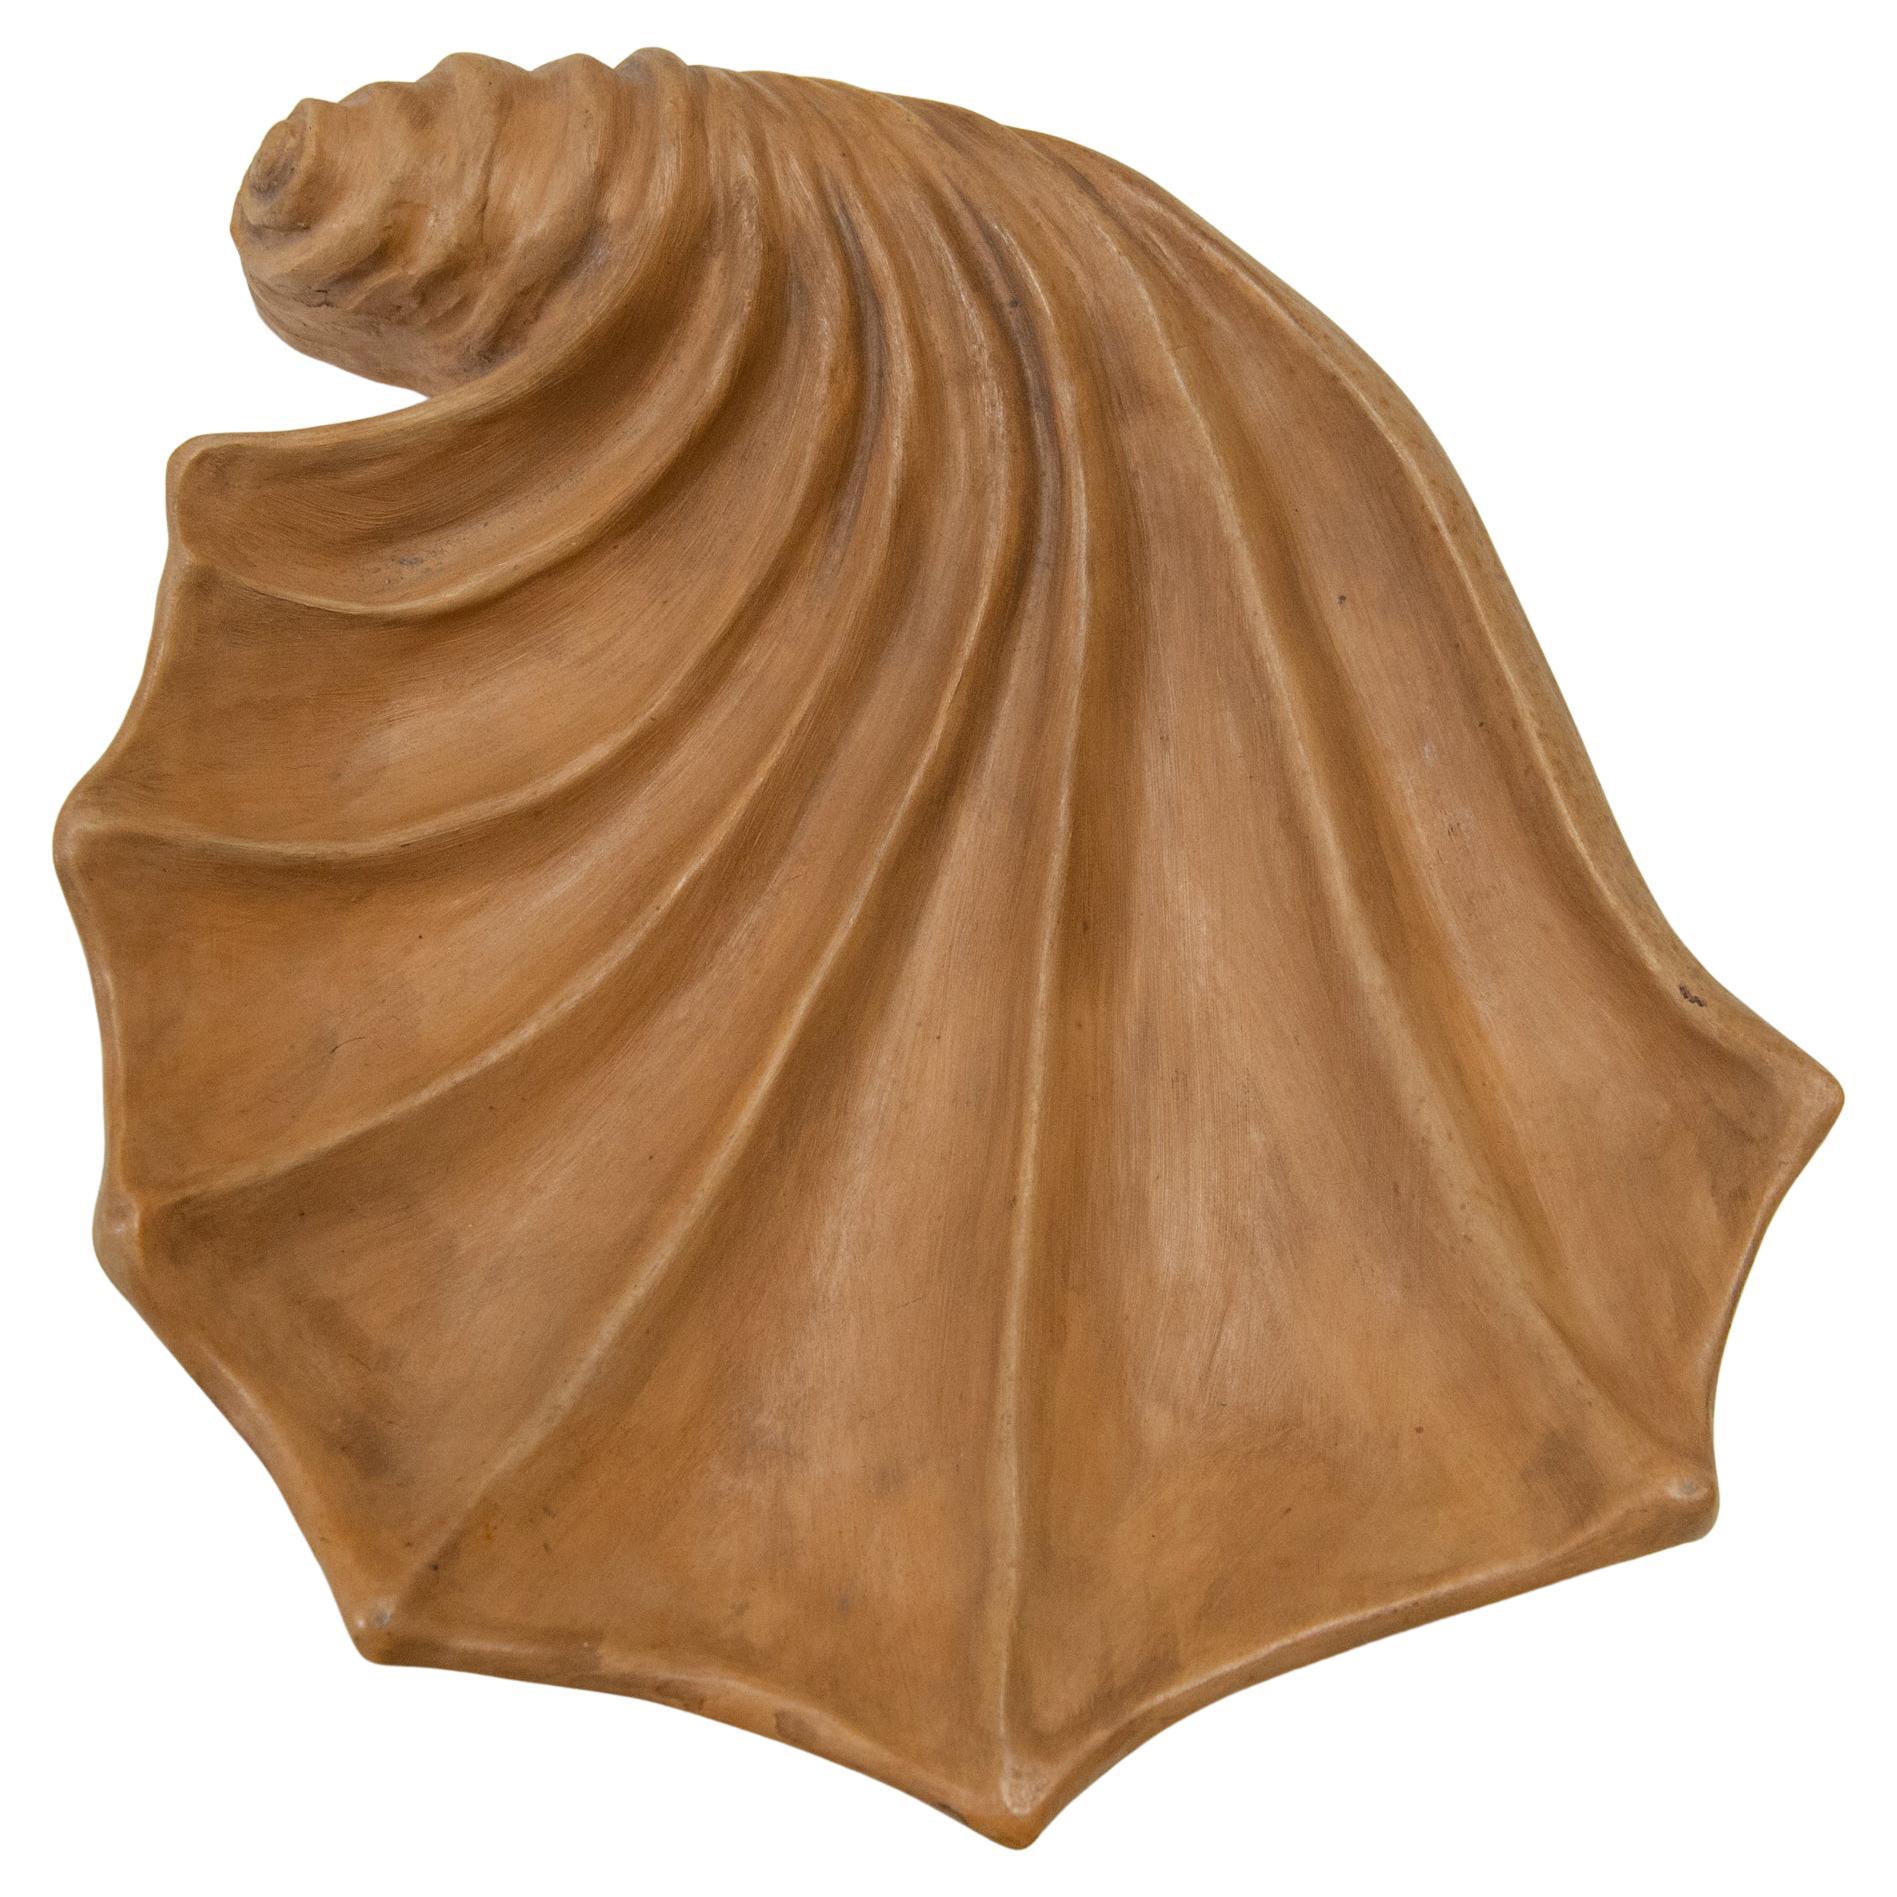 Terracotta Plate Modeled by Hand in the Shape of a Shell For Sale